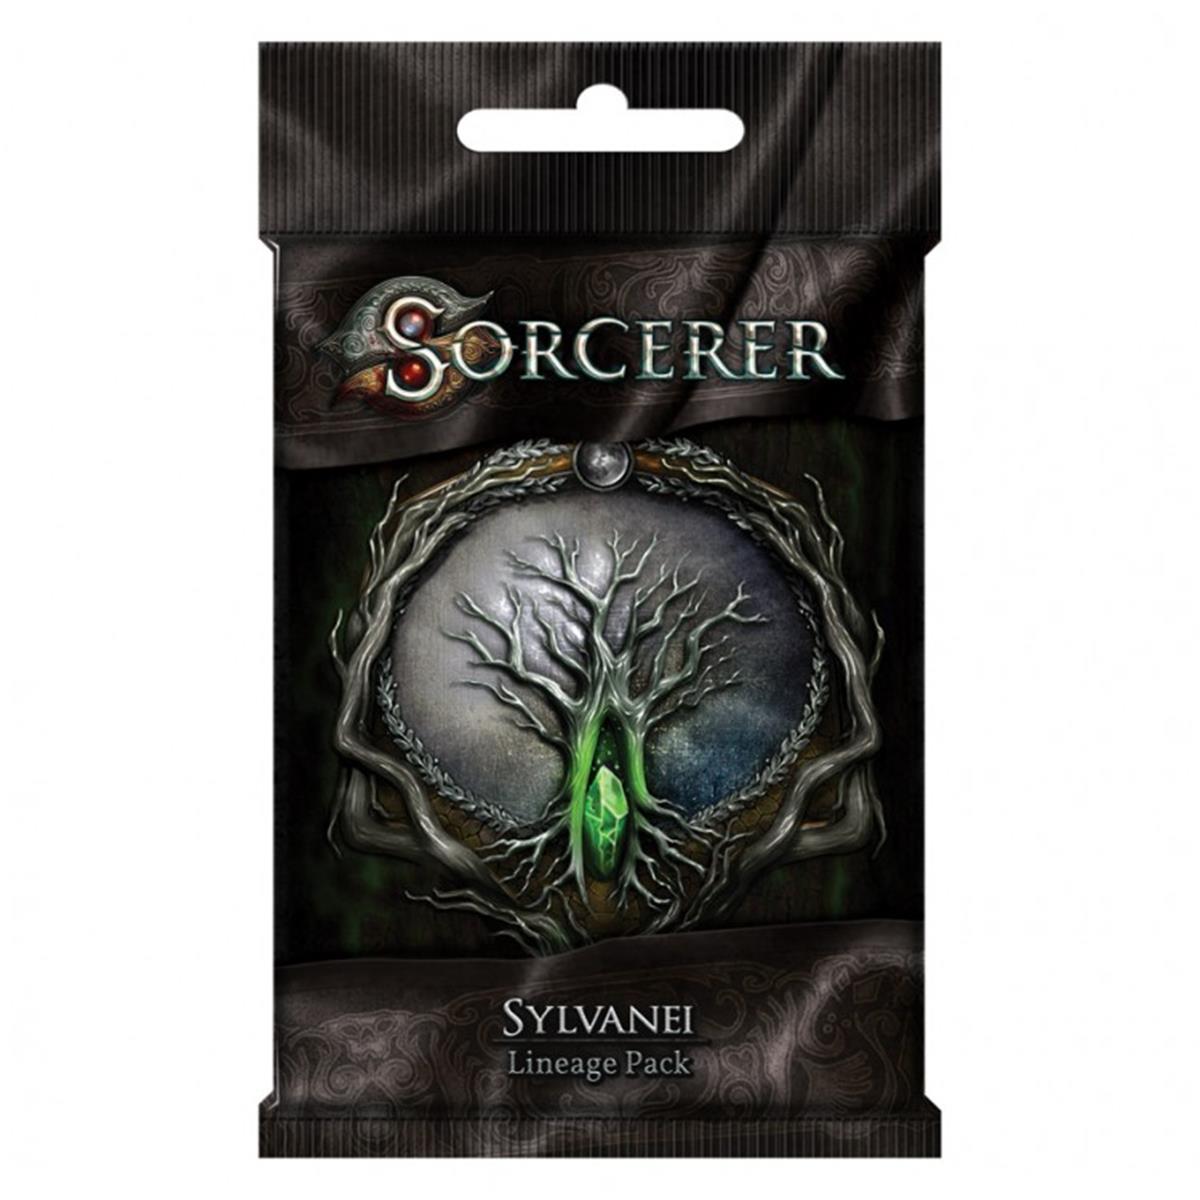 Sorcerer Sylvanei Lineage Single Game Card